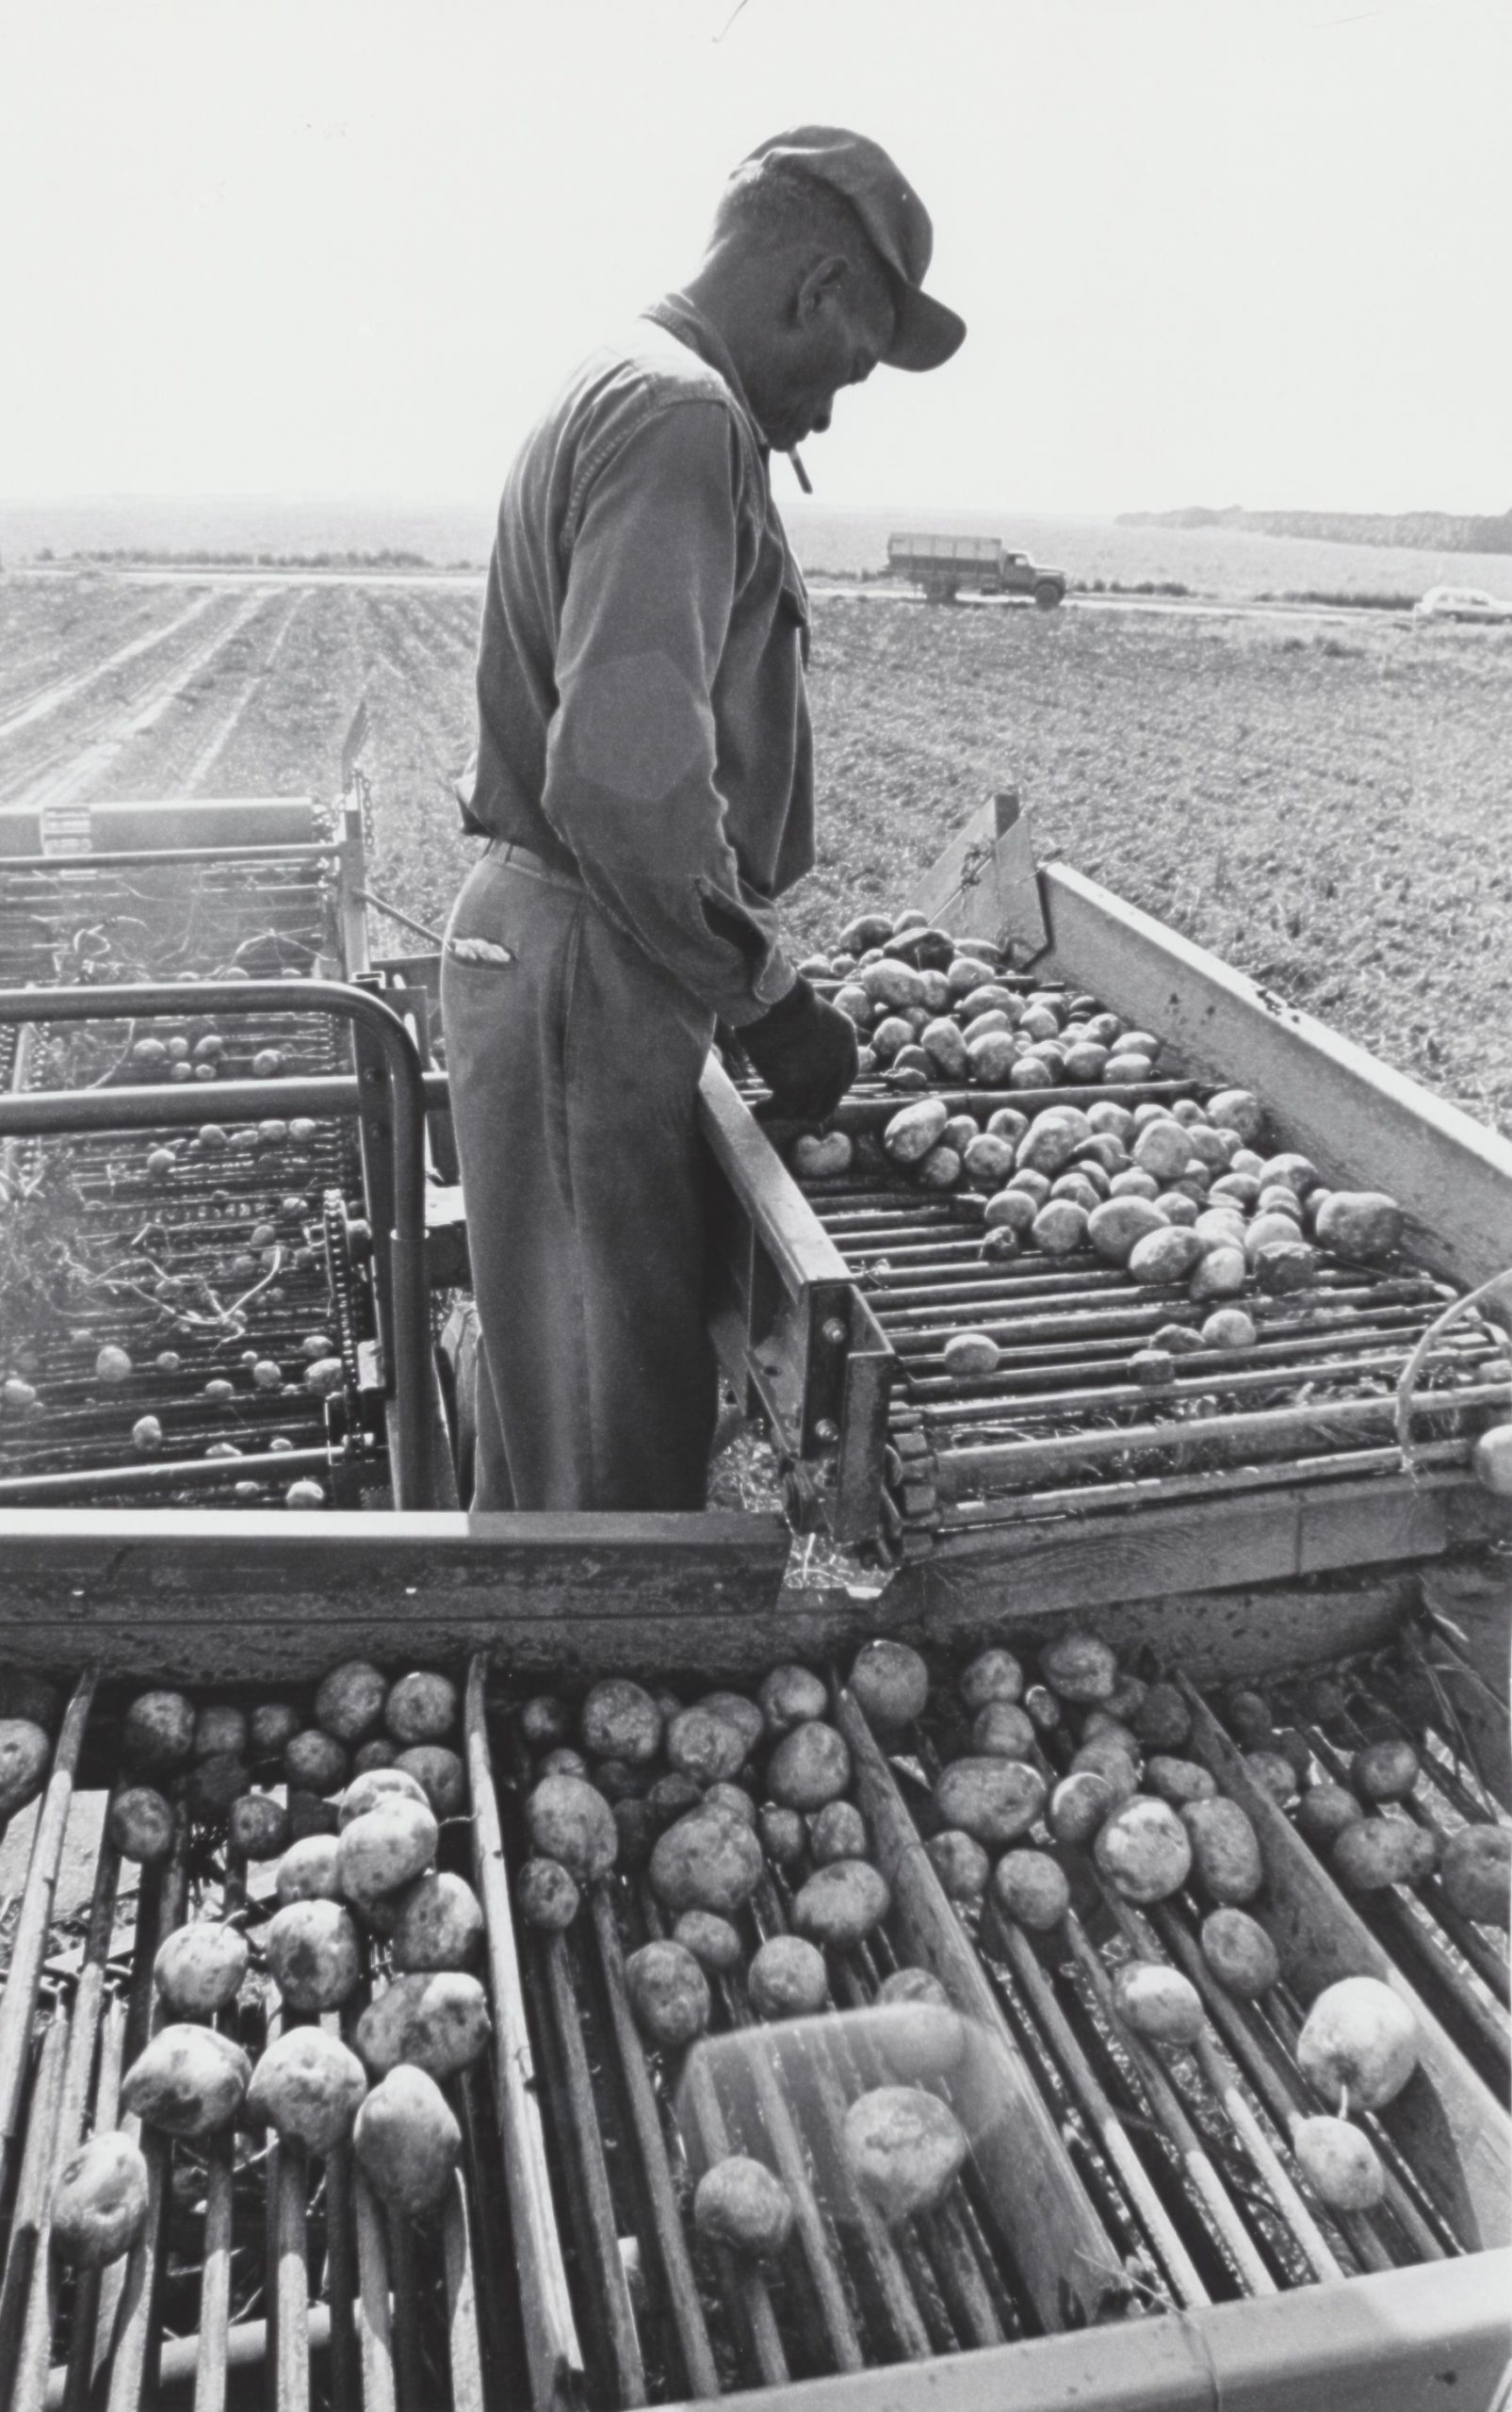 A worker in the South Fork potato fields.